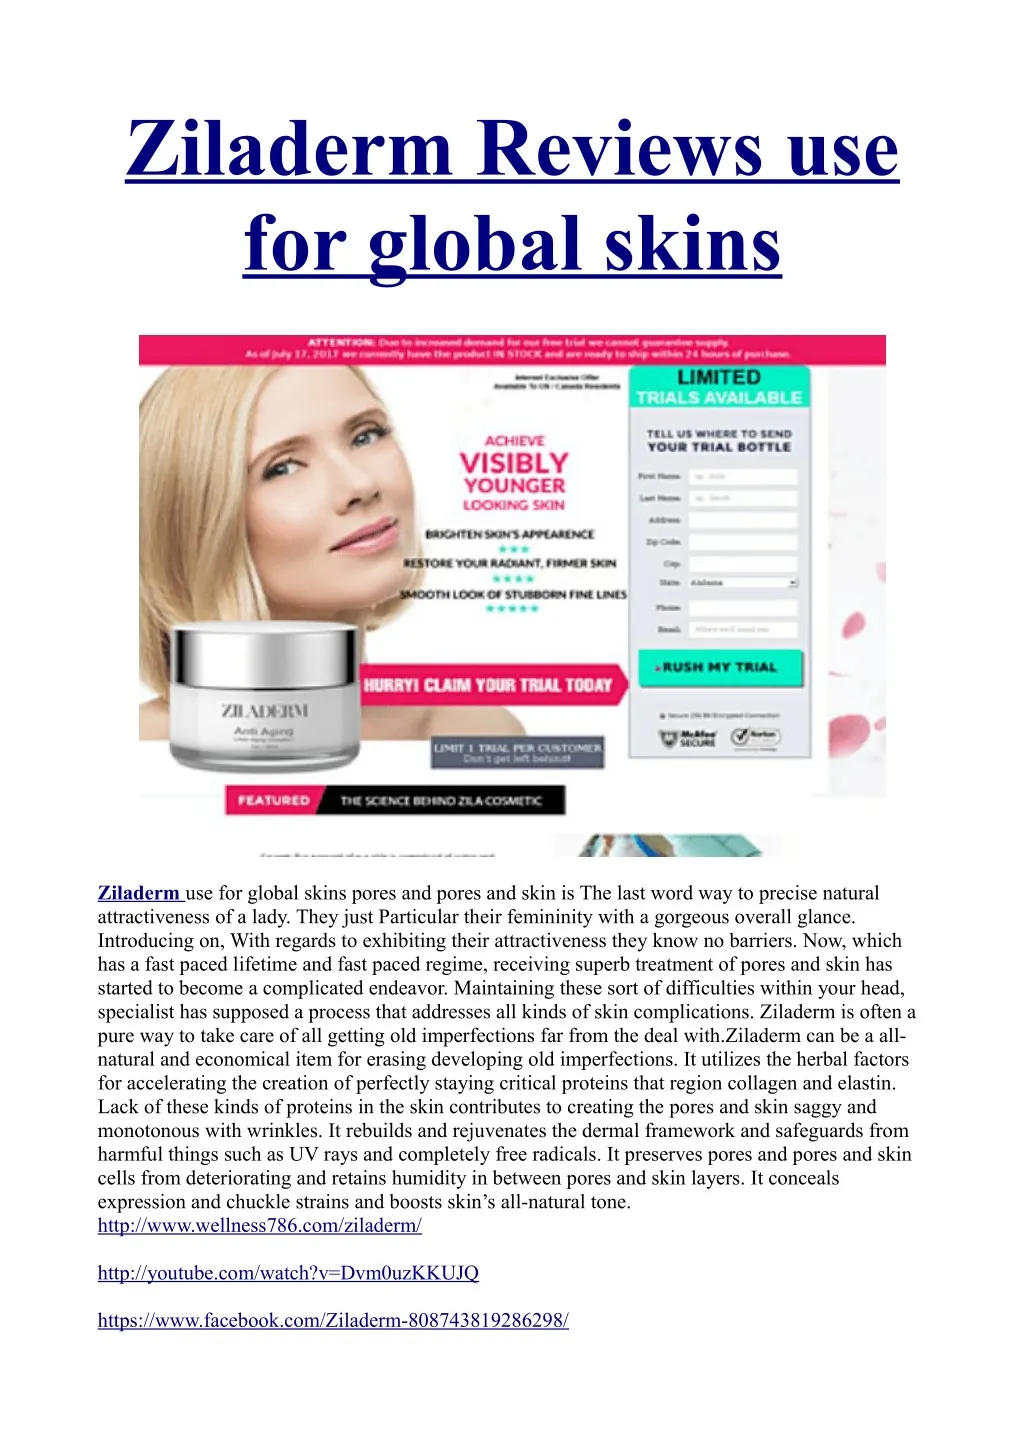 ziladerm reviews use for global skins